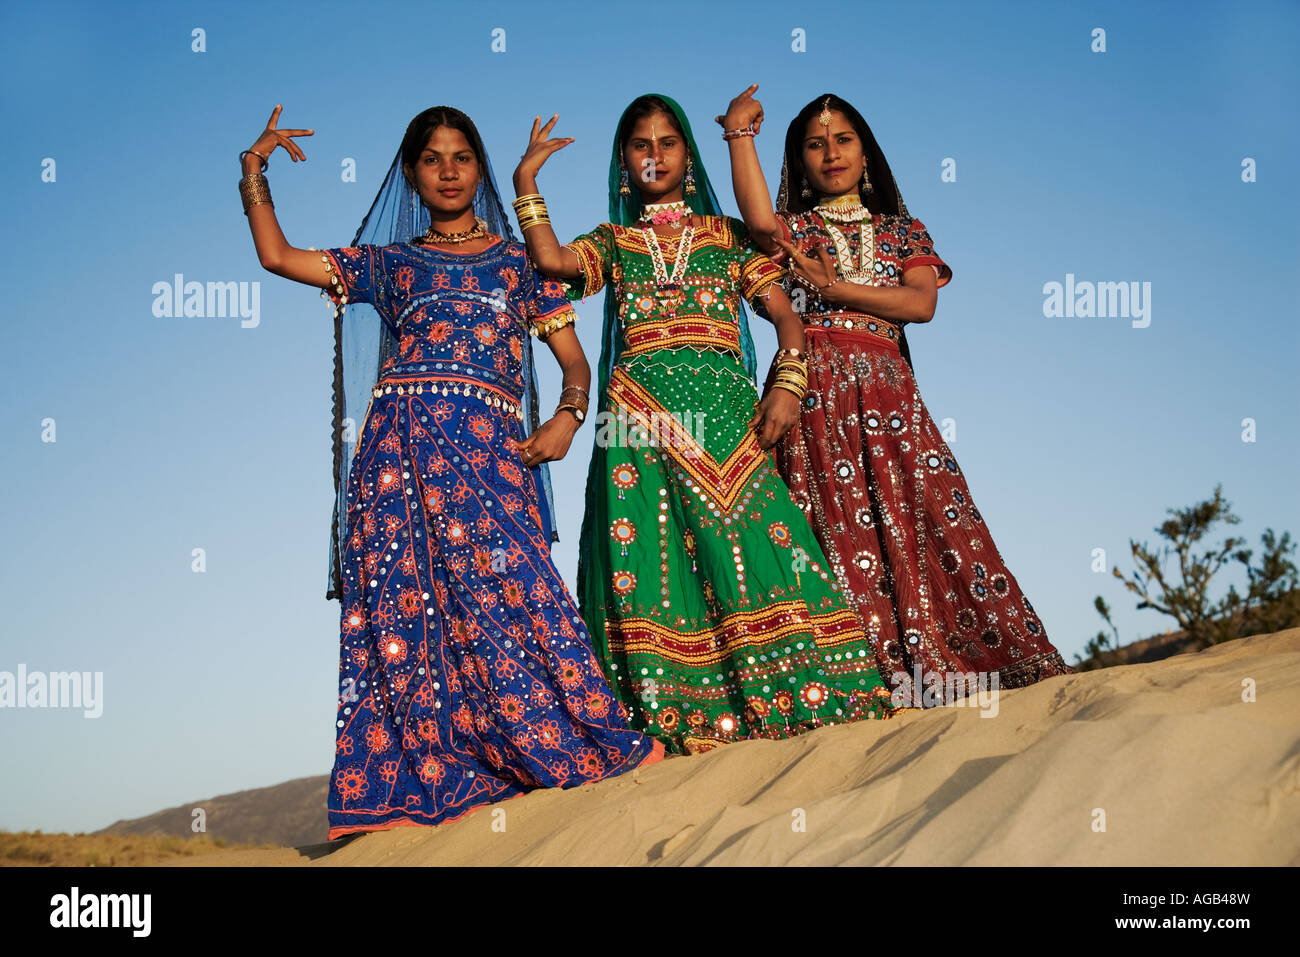 Indian Girl Wearing Traditional Rajasthani Dress Participate in Desert  Festival in Jaisalmer, Rajasthan, India Editorial Image - Image of fashion,  desert: 99988980